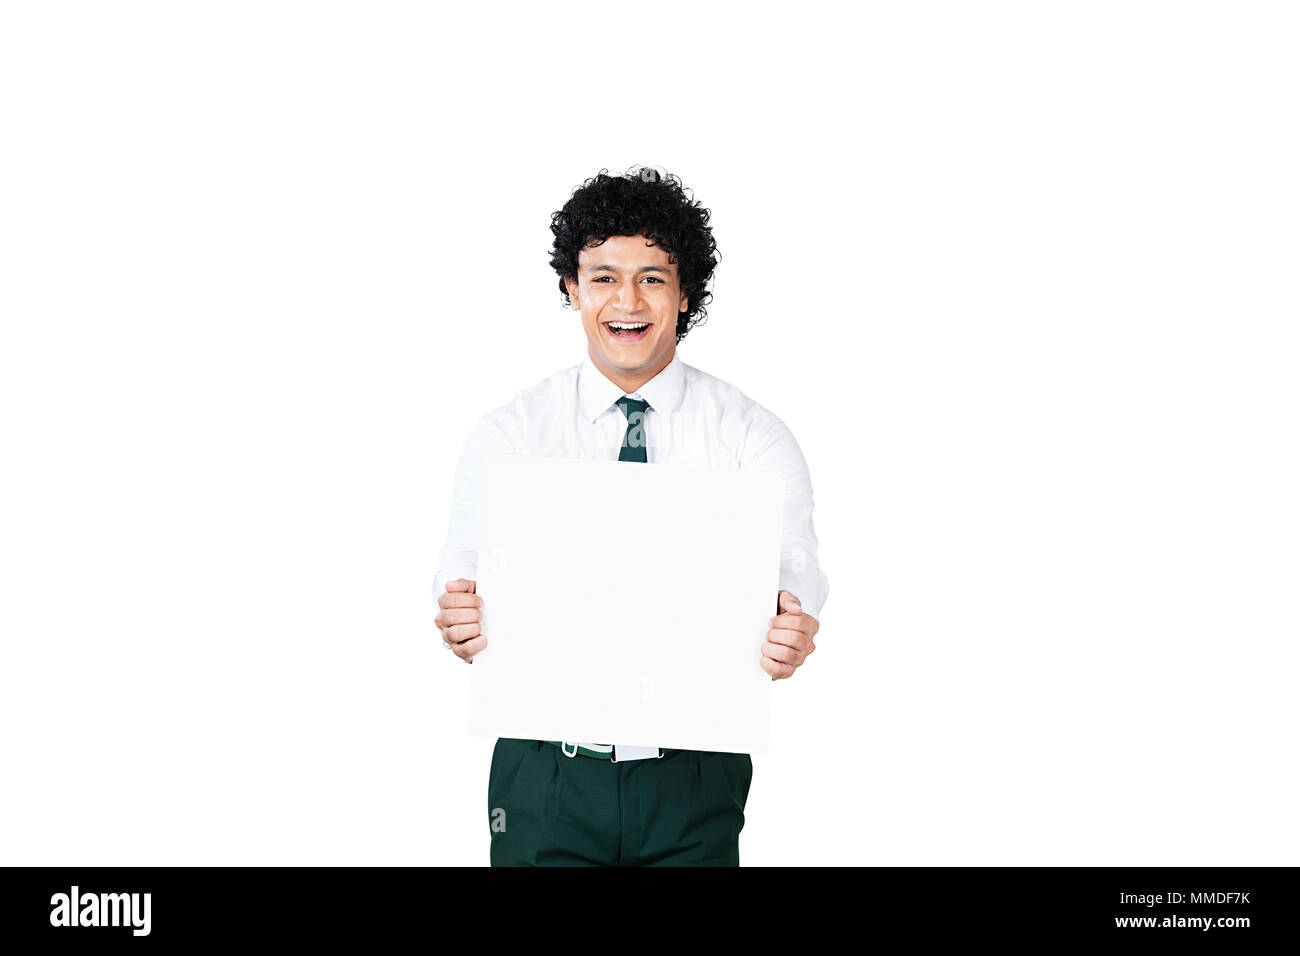 Smiling One Teenage School Boy Student Holding Blank Placard Stock Photo